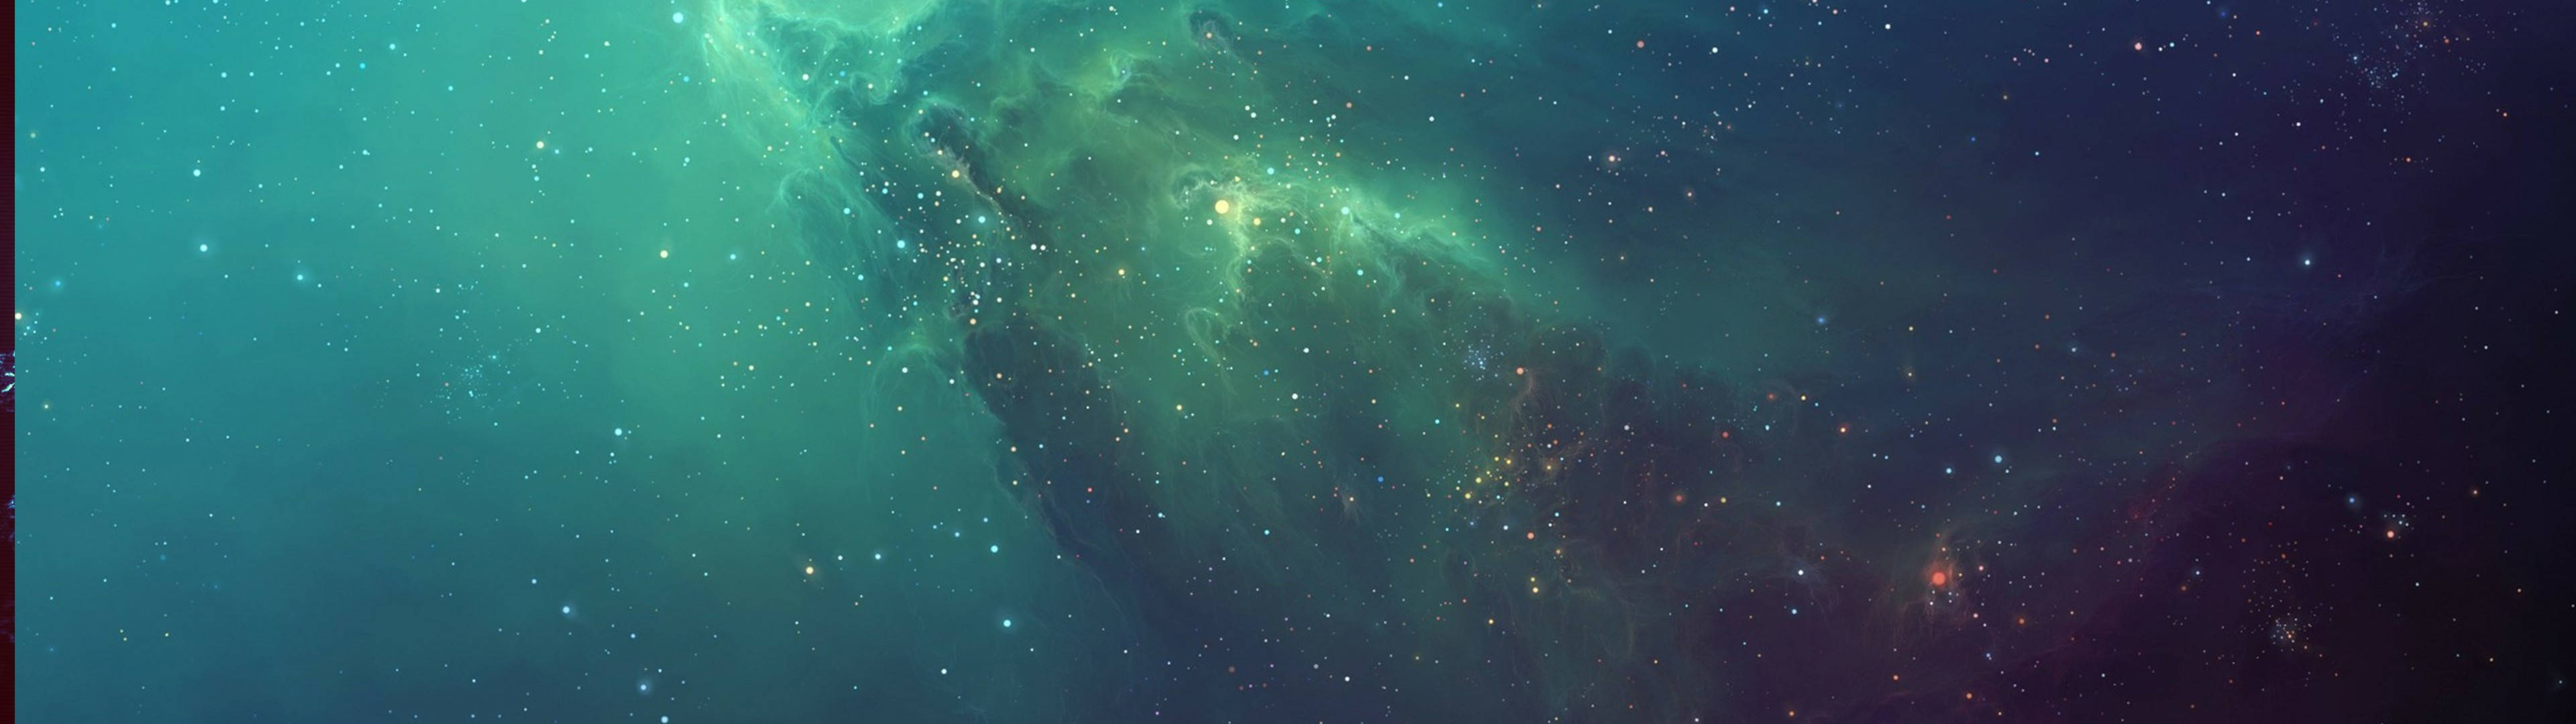 3840x1080 Hd Dual Monitor Water Sparkle Background